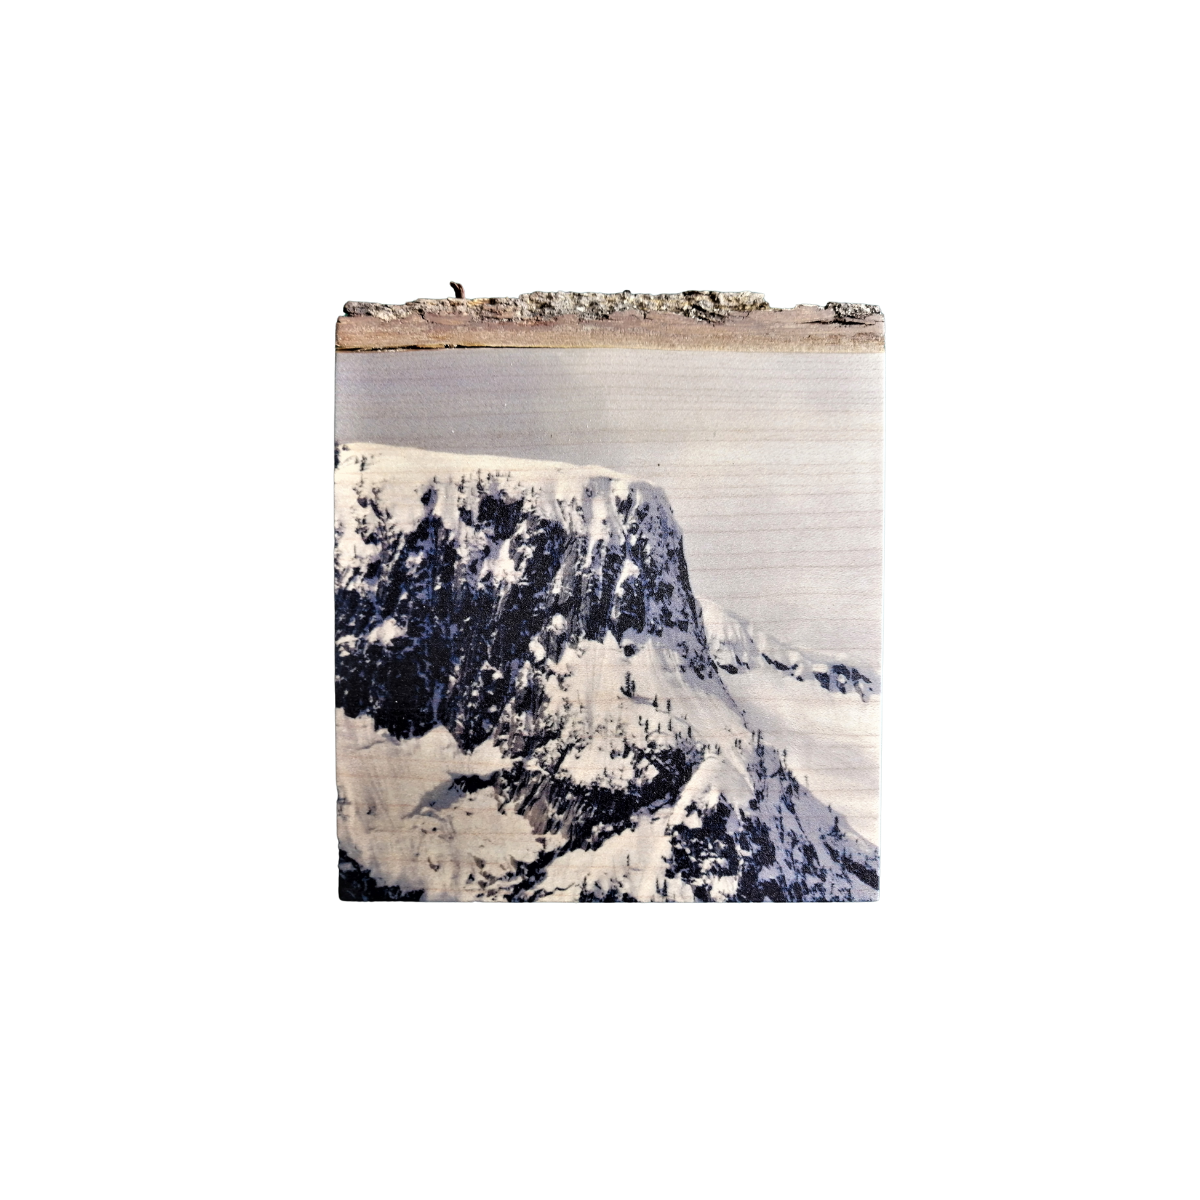 Live Edge Wood Wall Art Print - Table Mountain by Martin Bell (Small)